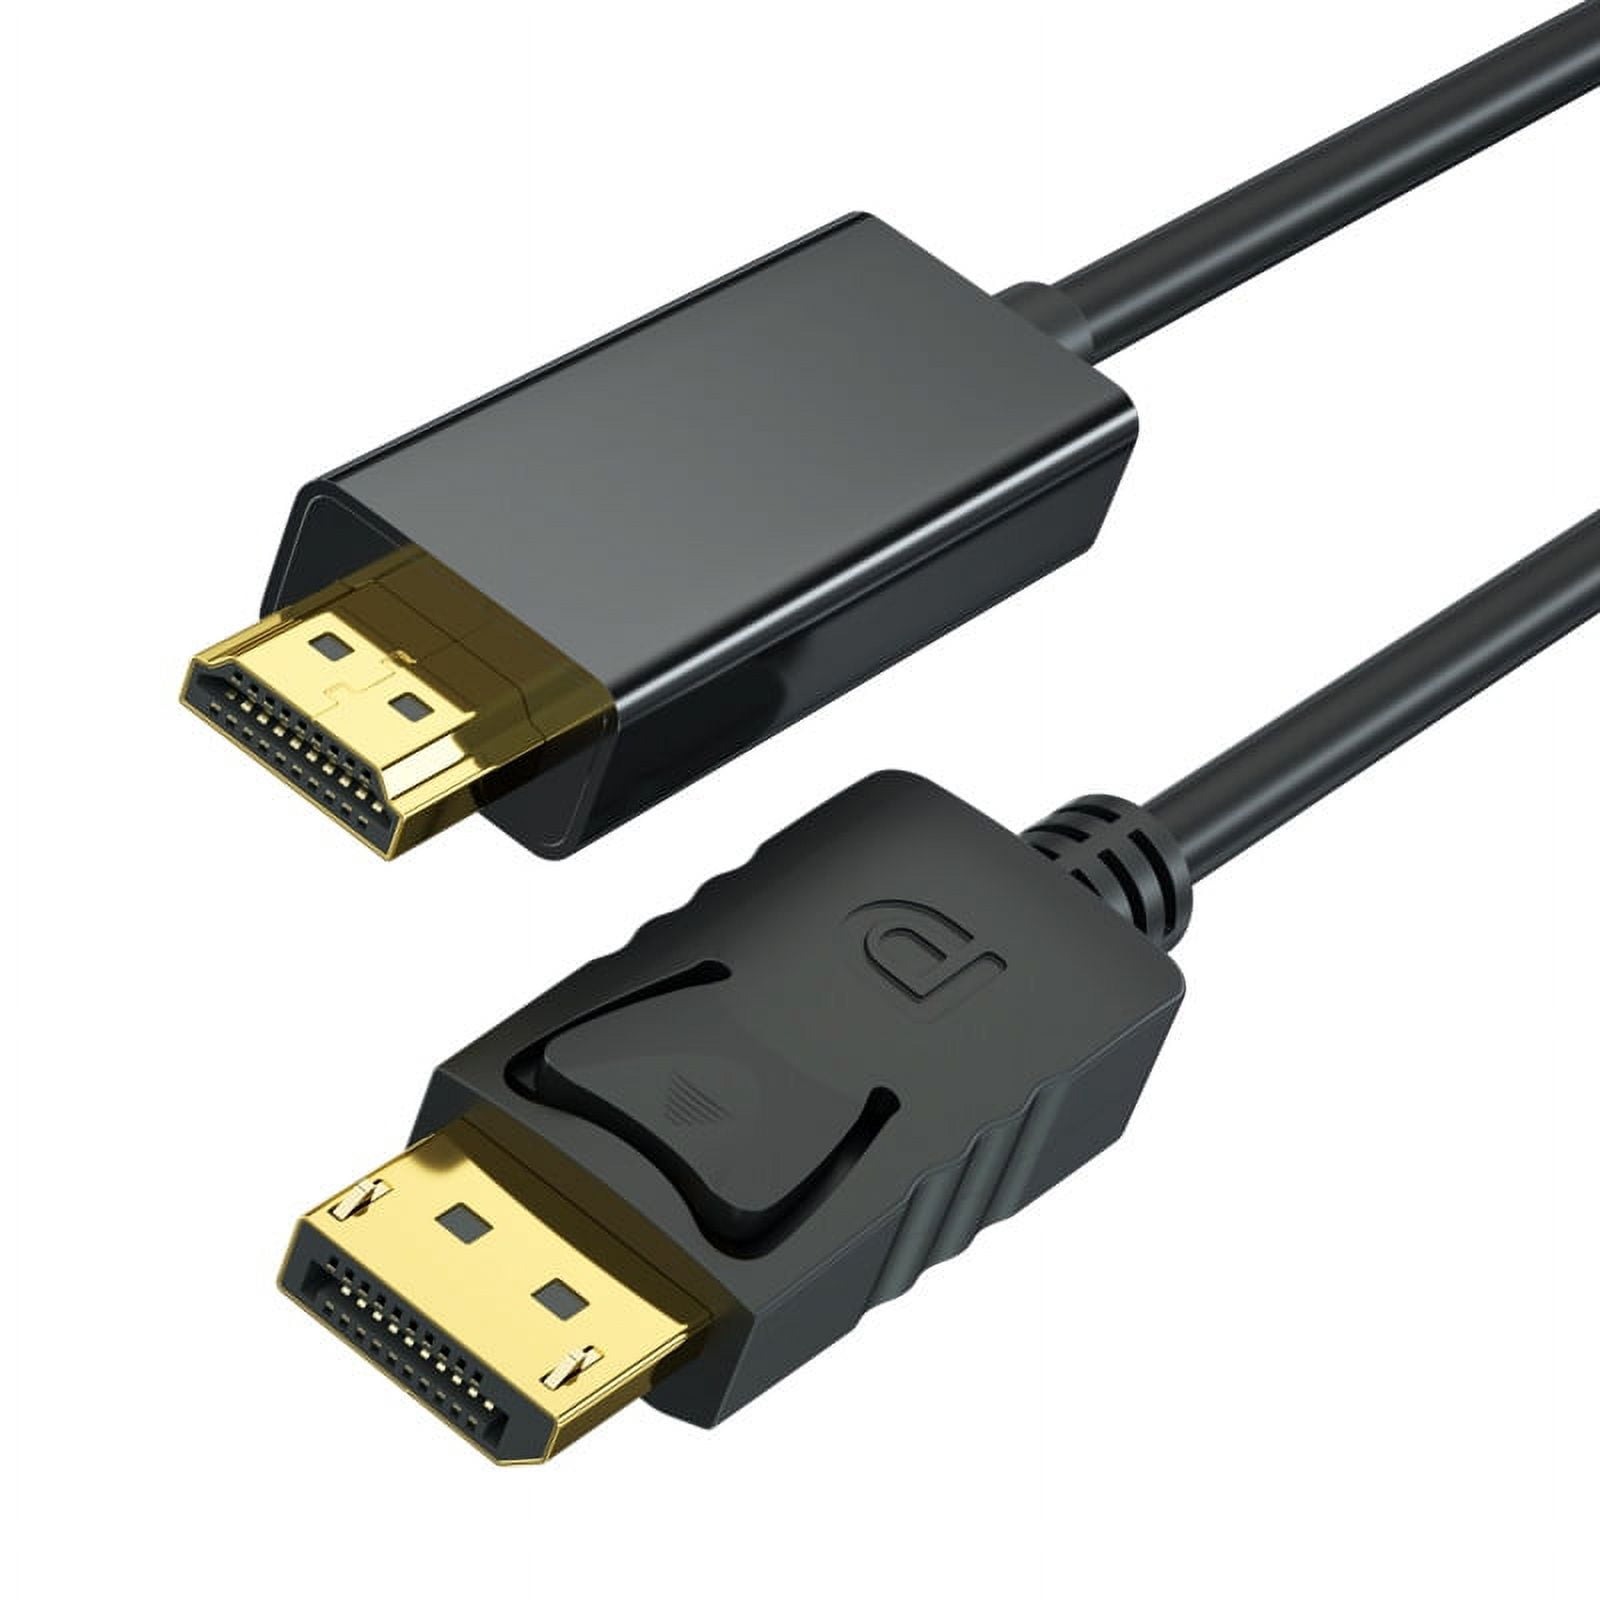 Basics Mini DisplayPort Male to HDMI Male Cable, 1080p, Gold-Plated  Plugs, 6 Foot, Black for Personal Computer